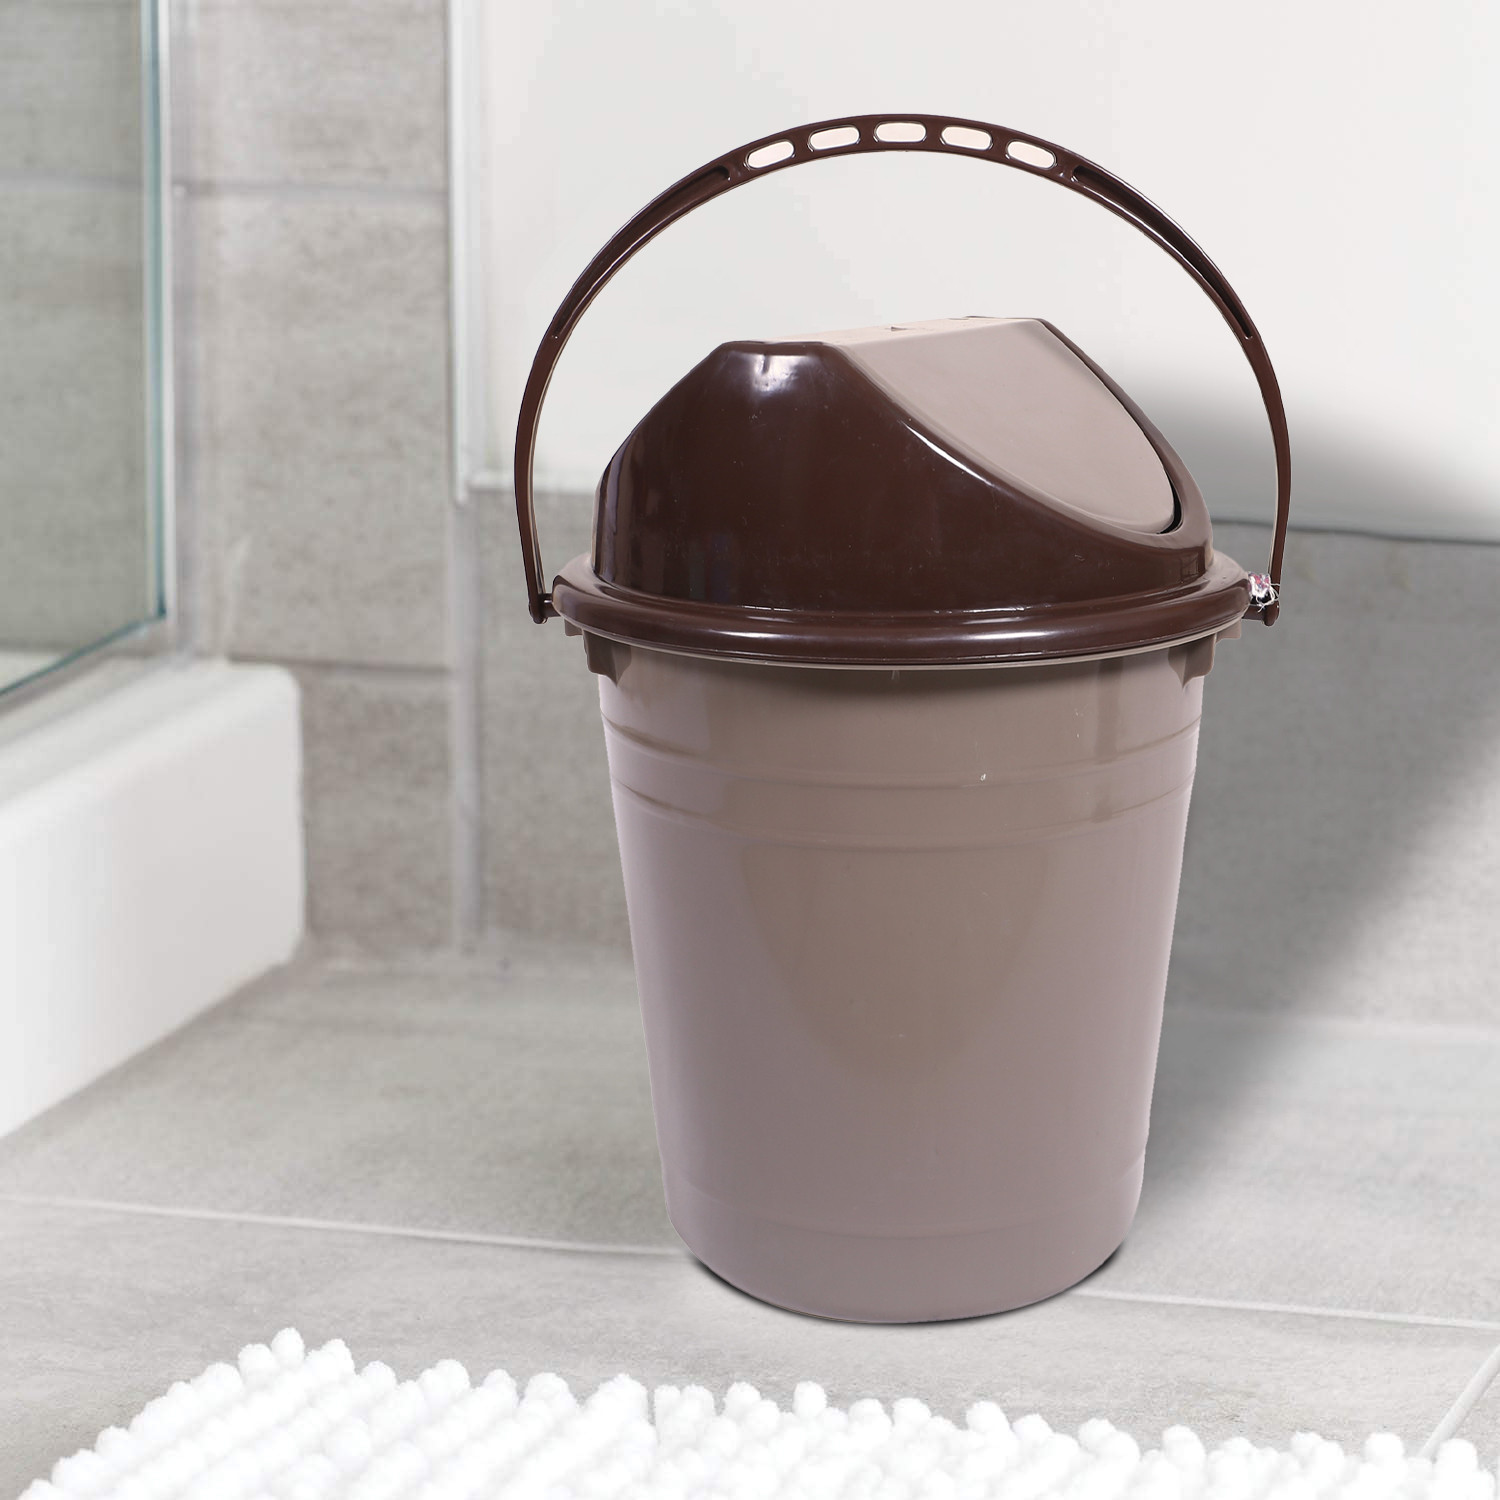 Kuber Industries Plastic Dustbin with Swinging Lid|Portable Garbage Basket & Round Trash Can for Home,Kitchen,Office,College,10 Ltr (Brown)